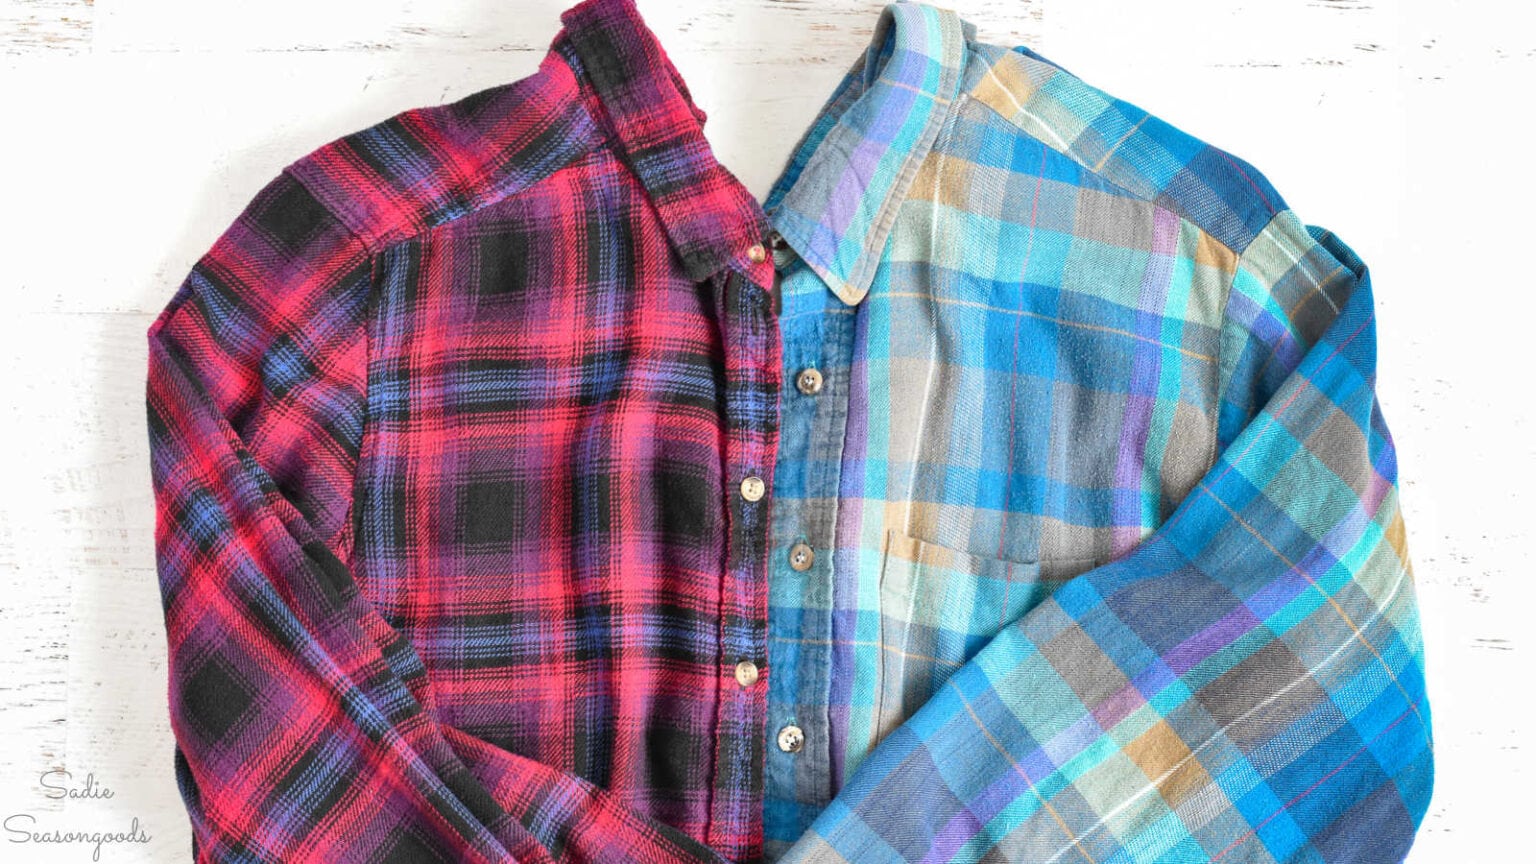 Crafts You Can Make from Flannel Shirts